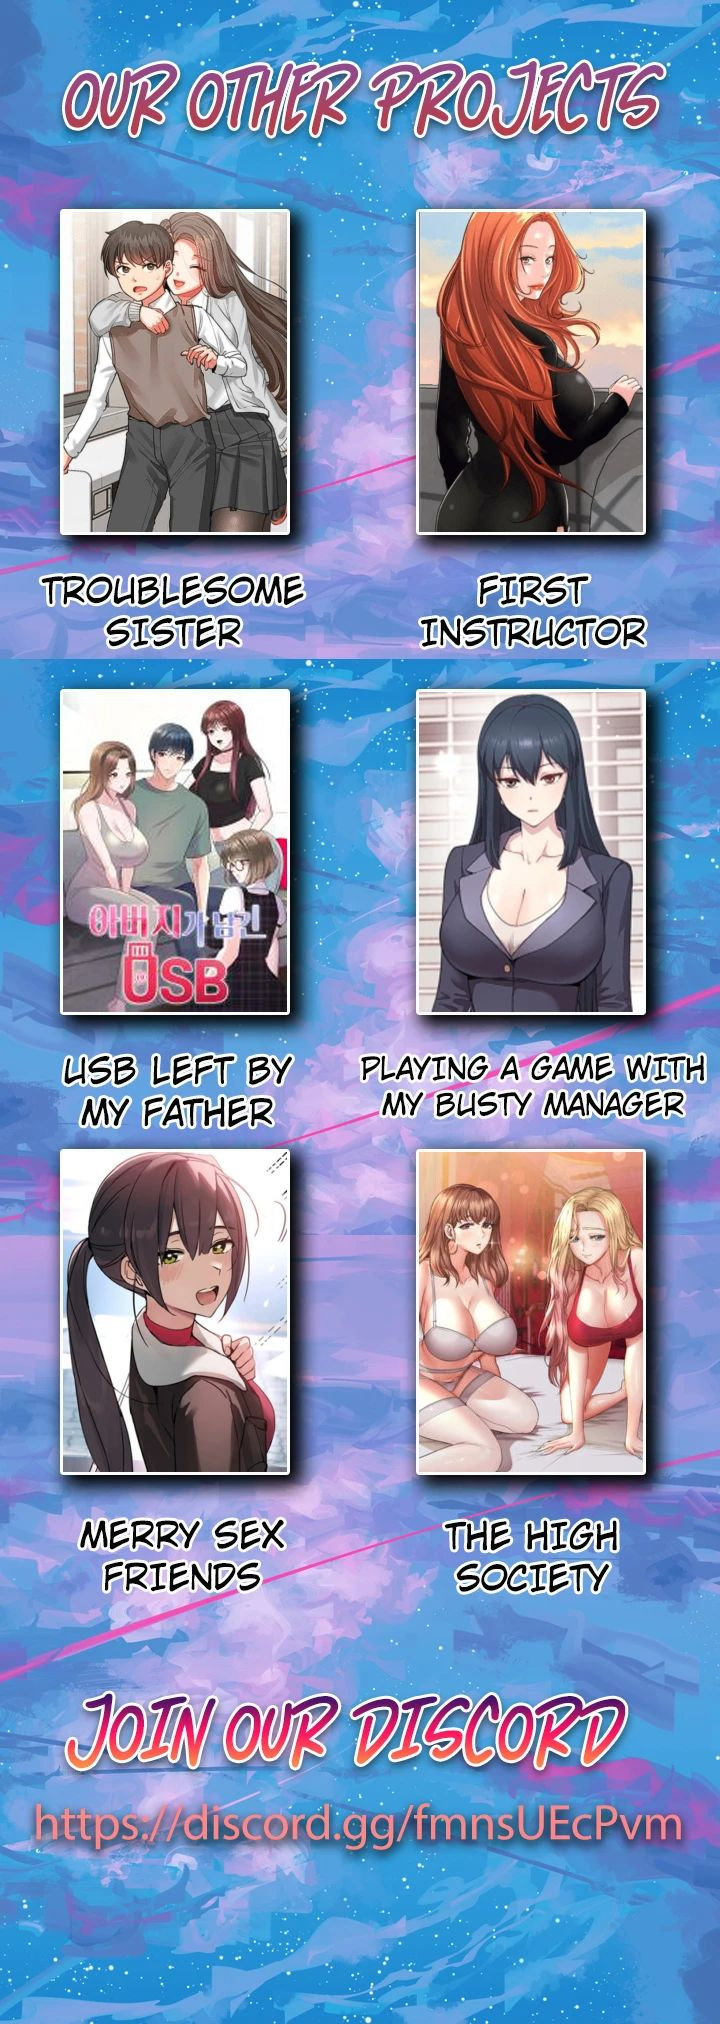 Playing a game with my Busty Manager Chapter 11 - Page 10